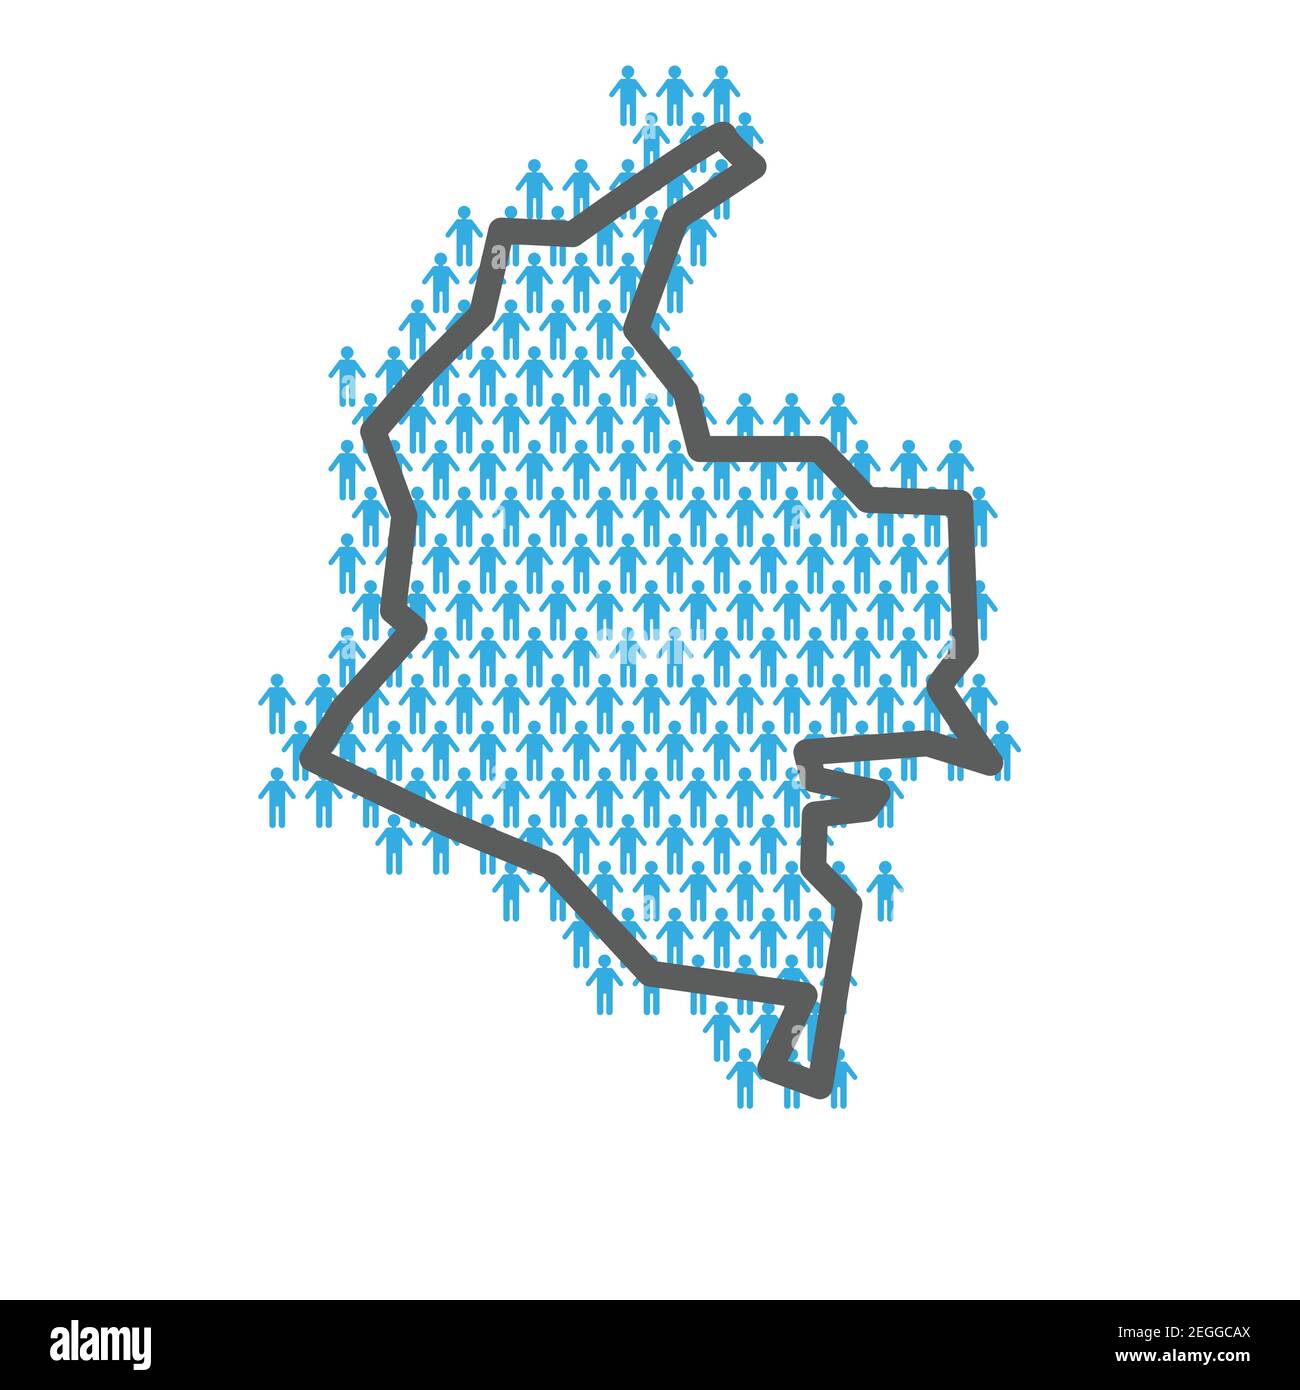 Colombia population map. Country outline made from people figures Stock Vector